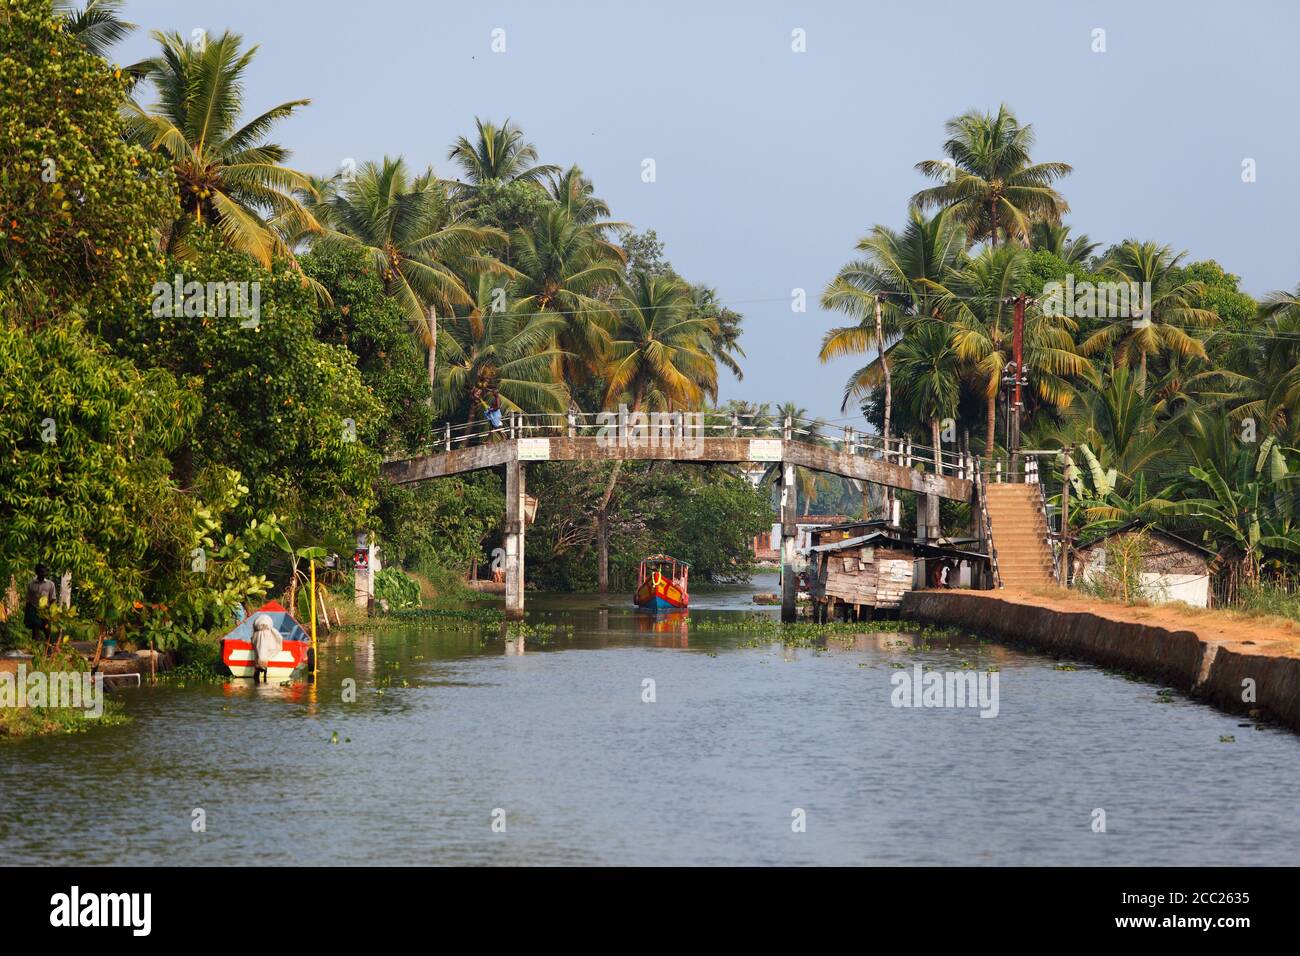 India, Kerala, Alappuzha, View of backwaters of alleppey Stock Photo